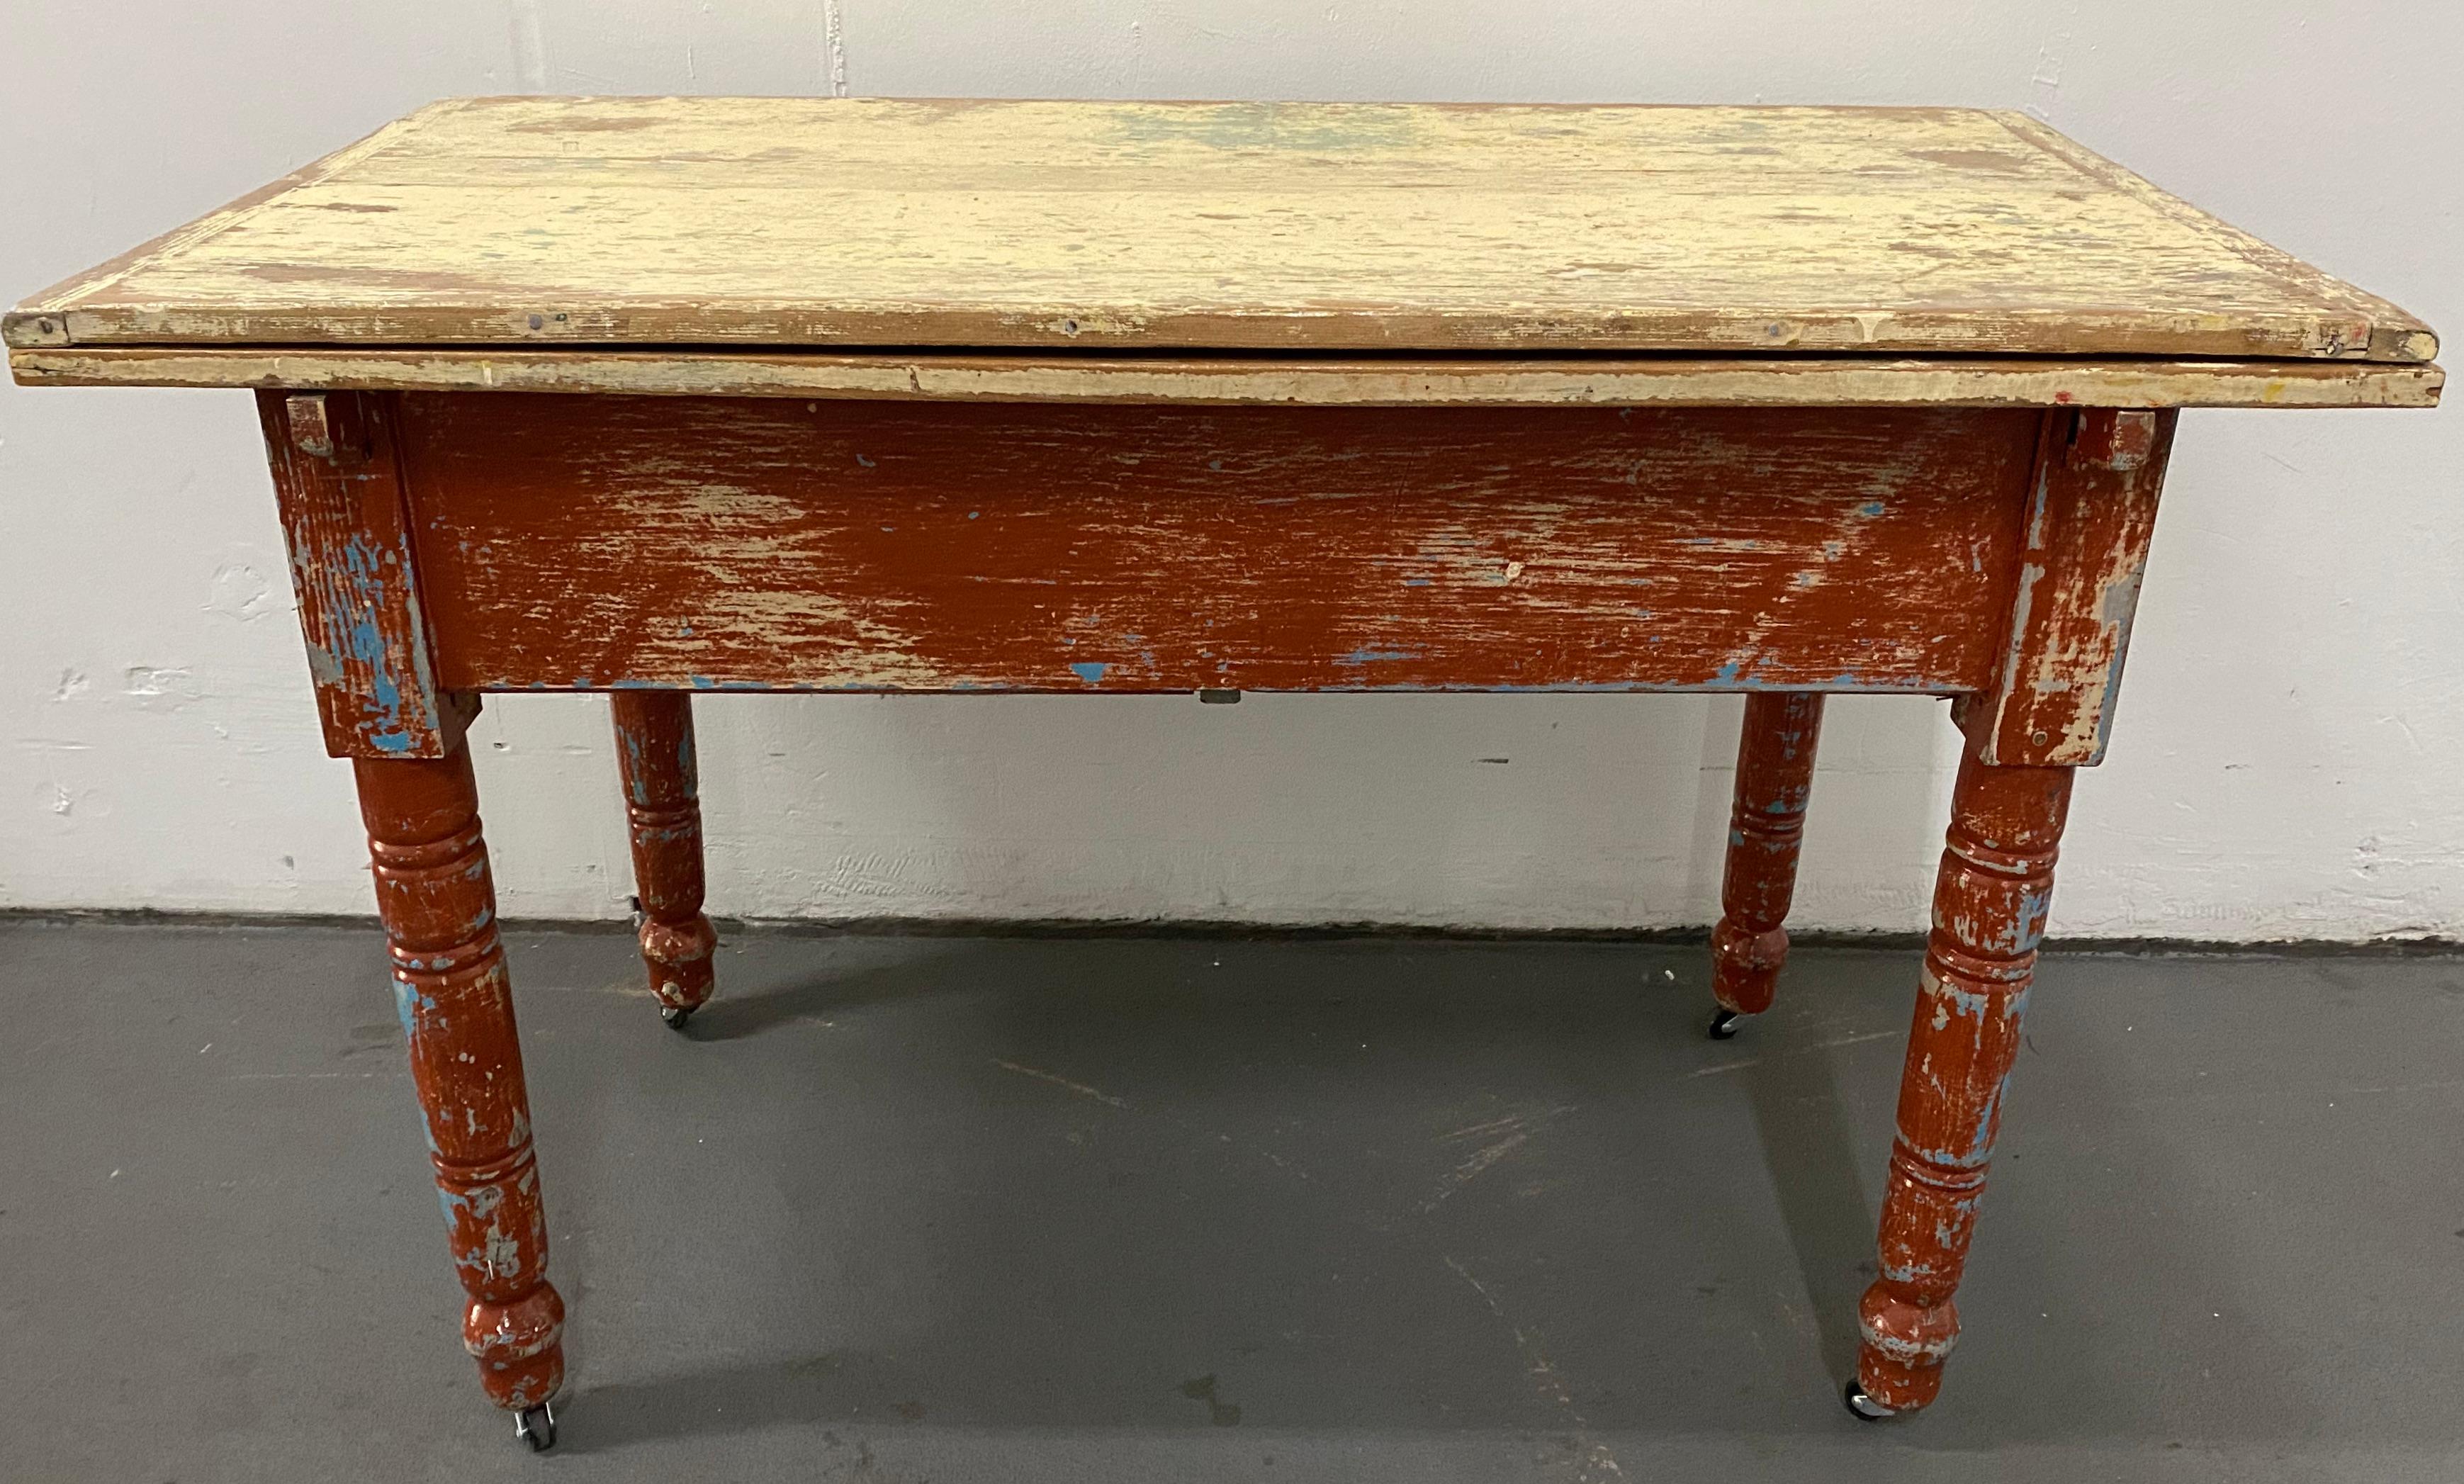 American Vintage Painted Table with Two Drawers and Turned Legs, circa 1930